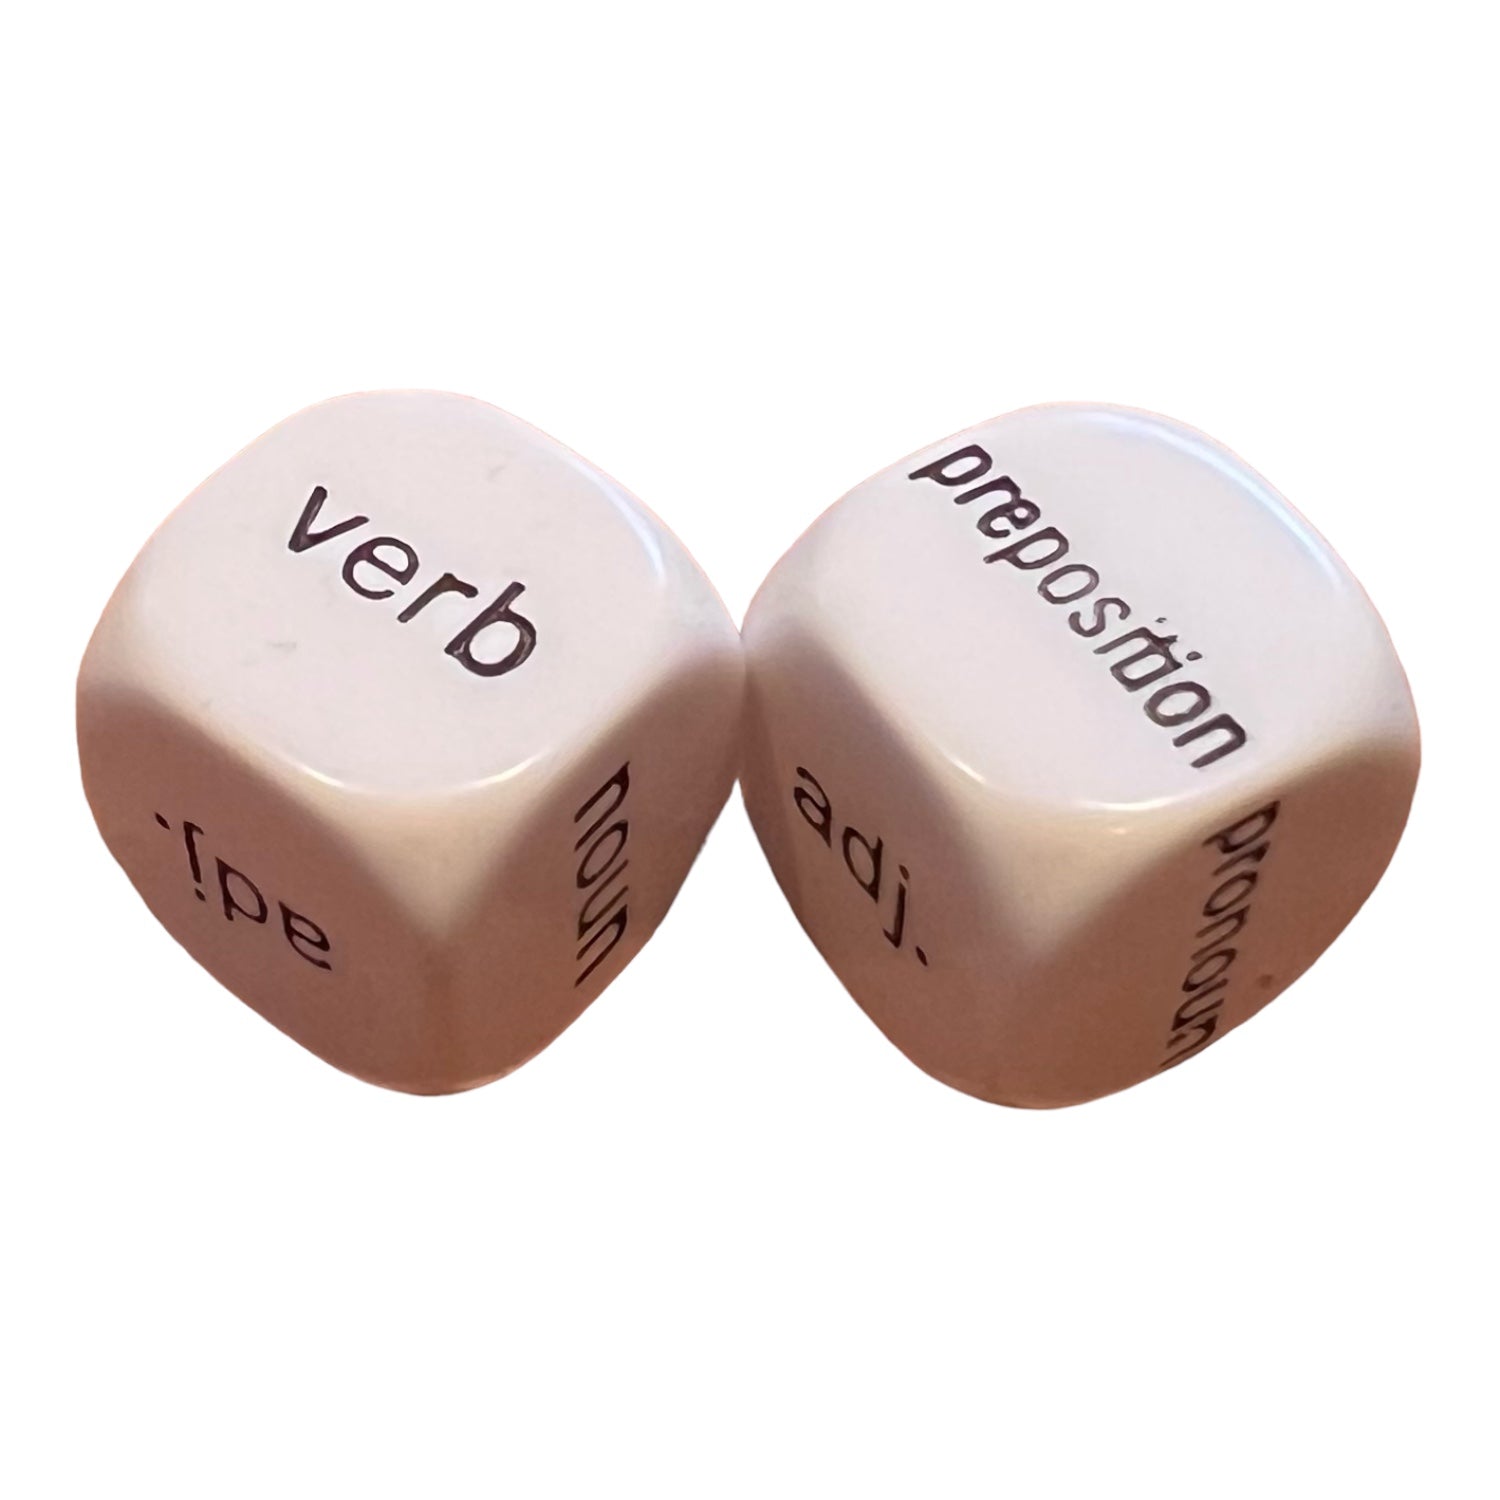 Dice - Parts of Speech Dice (includes Prepositions and Pronouns)